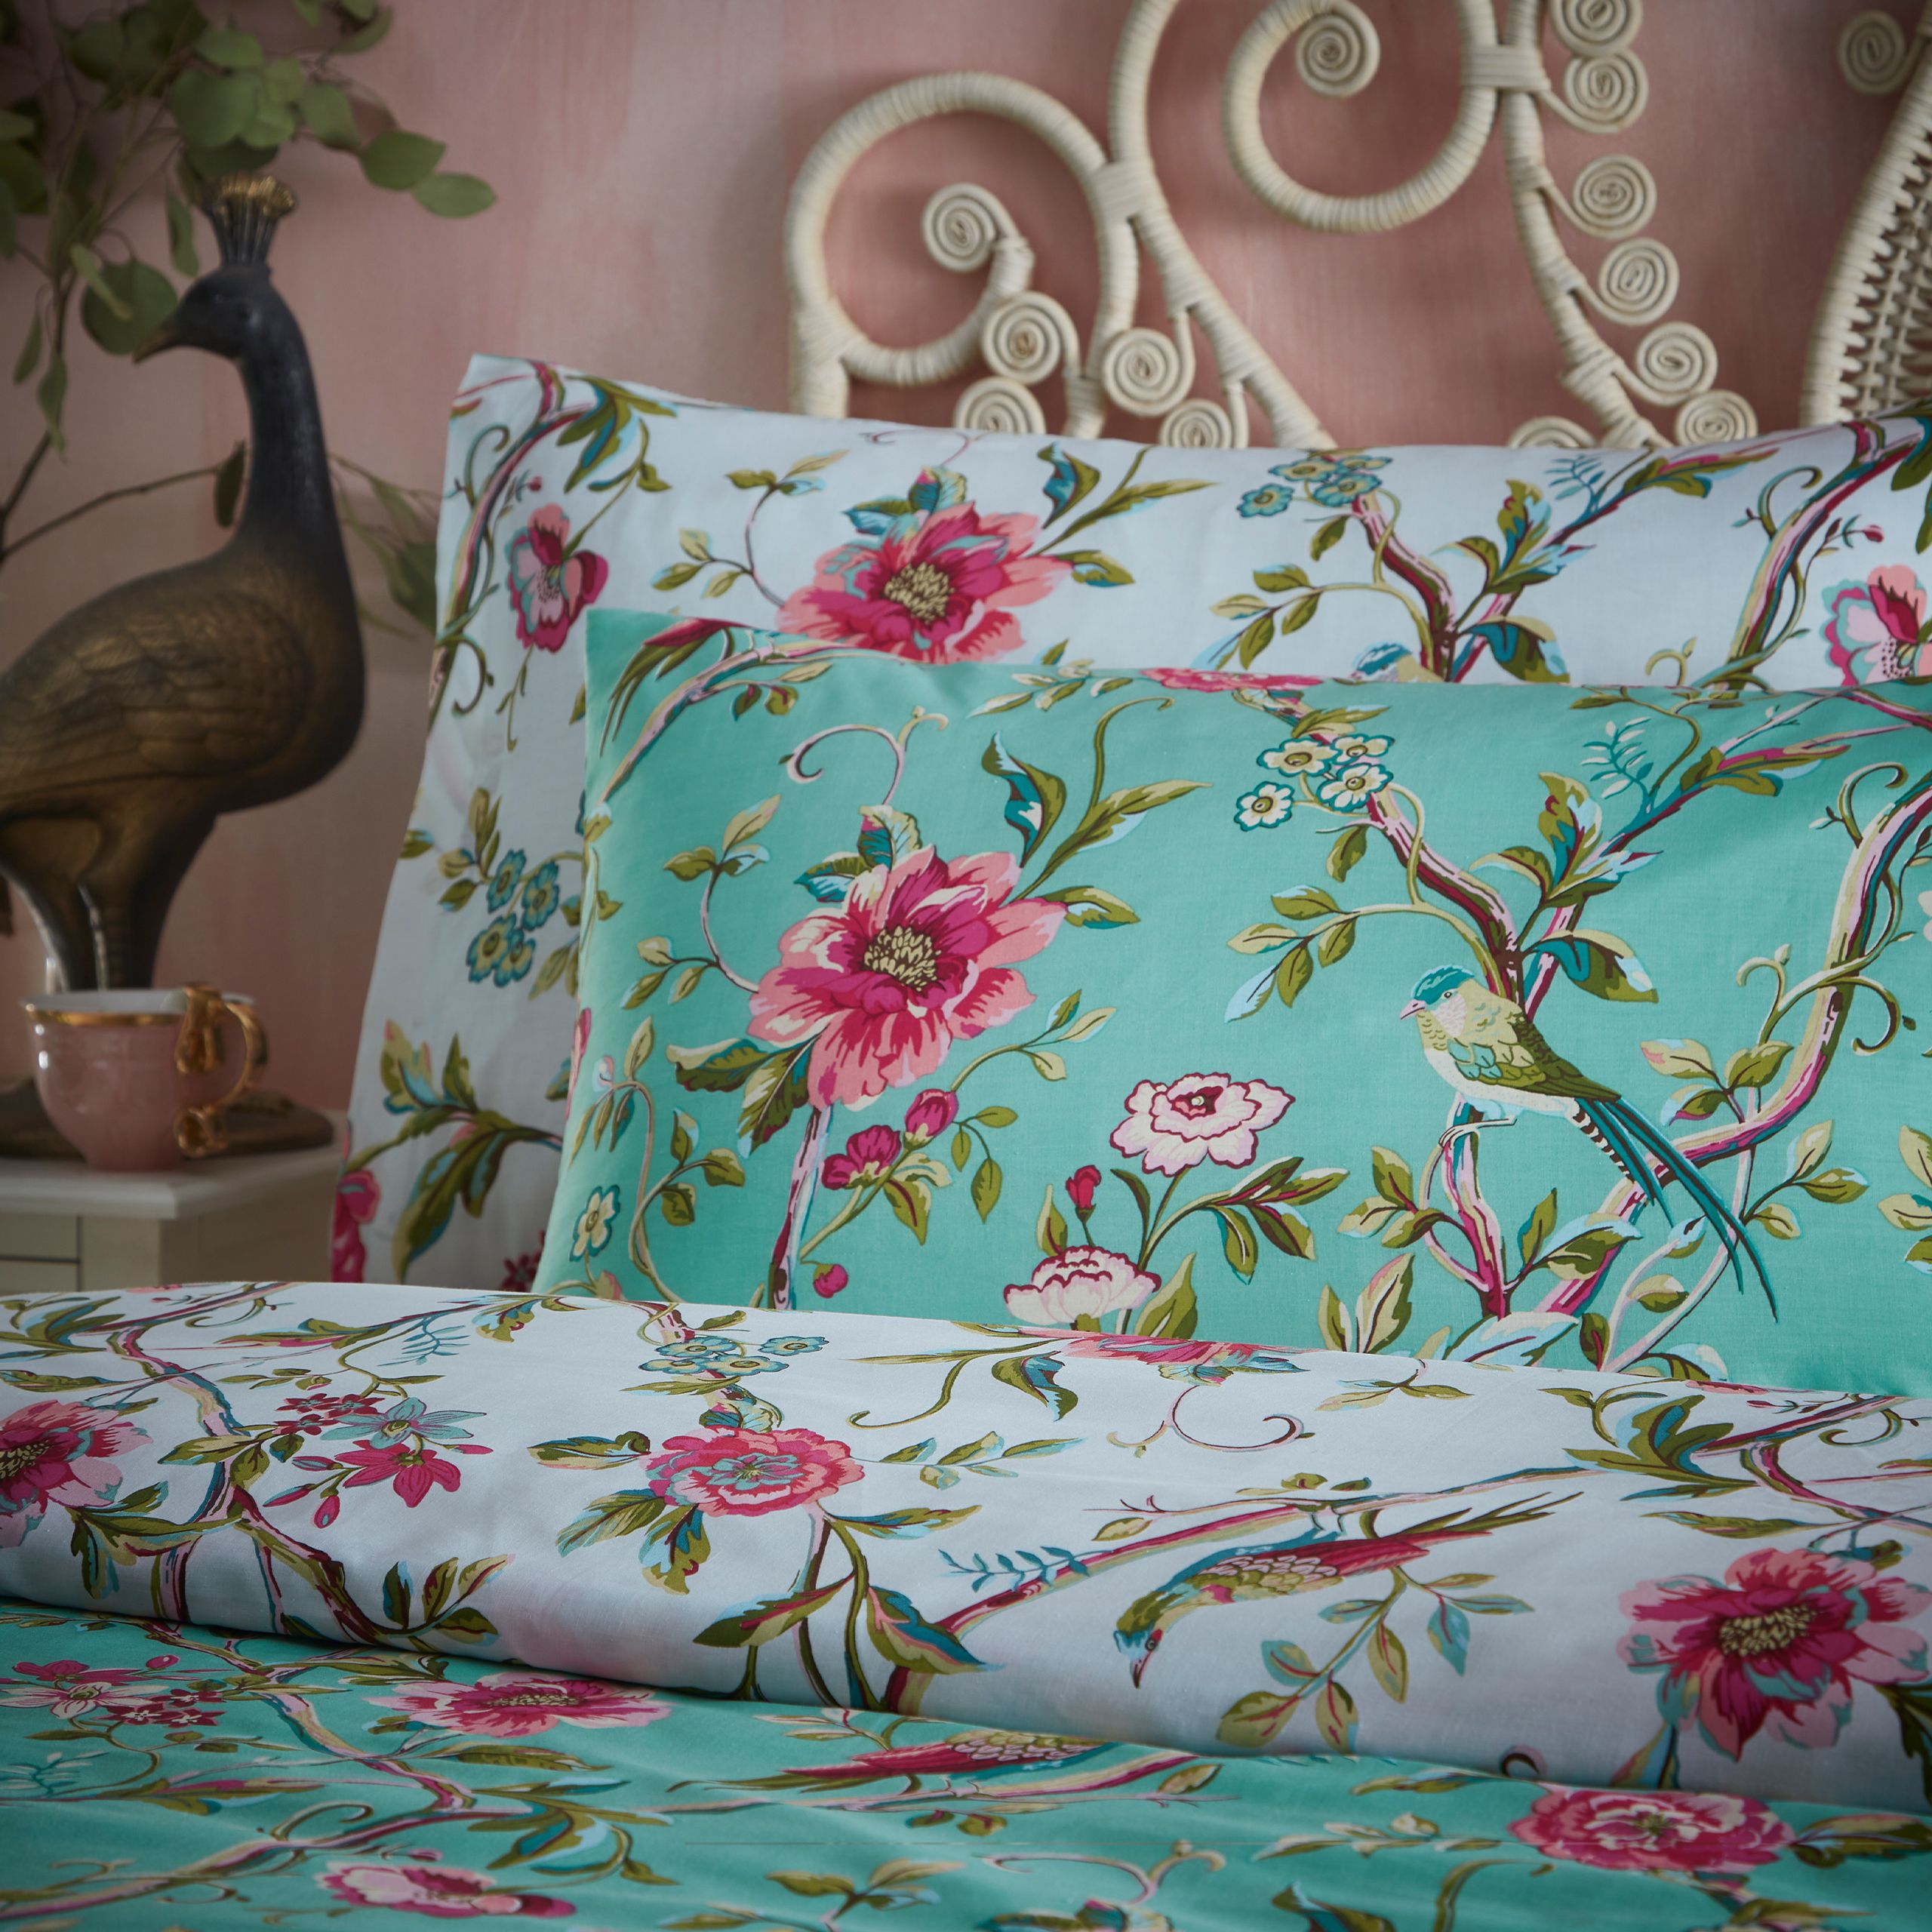 Add a romantic touch to your bedroom with the Vintage Chinoiserie bedding, featuring swirling floral vines and beautiful exotic birds. With a coordinating design on the reverse, on a fresh, light base for a more tranquil look.